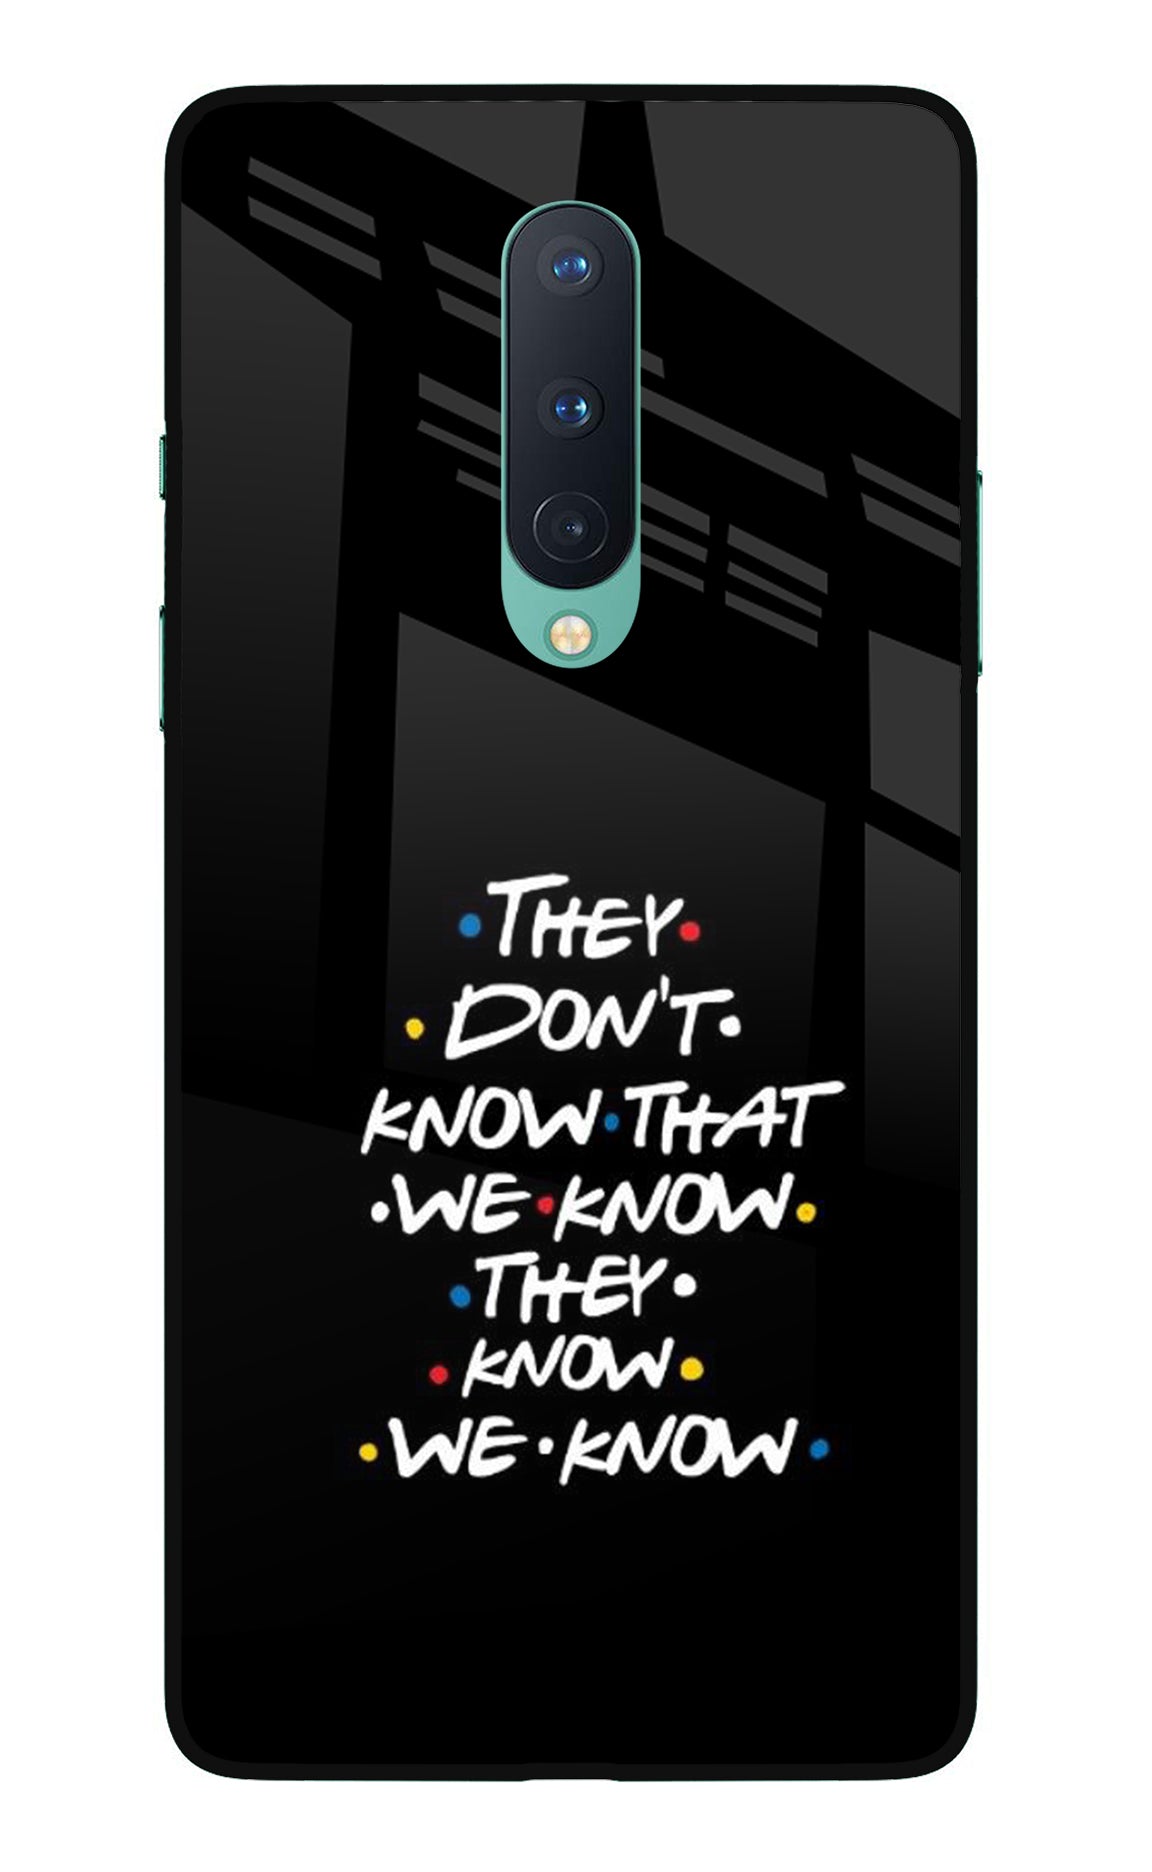 FRIENDS Dialogue Oneplus 8 Back Cover